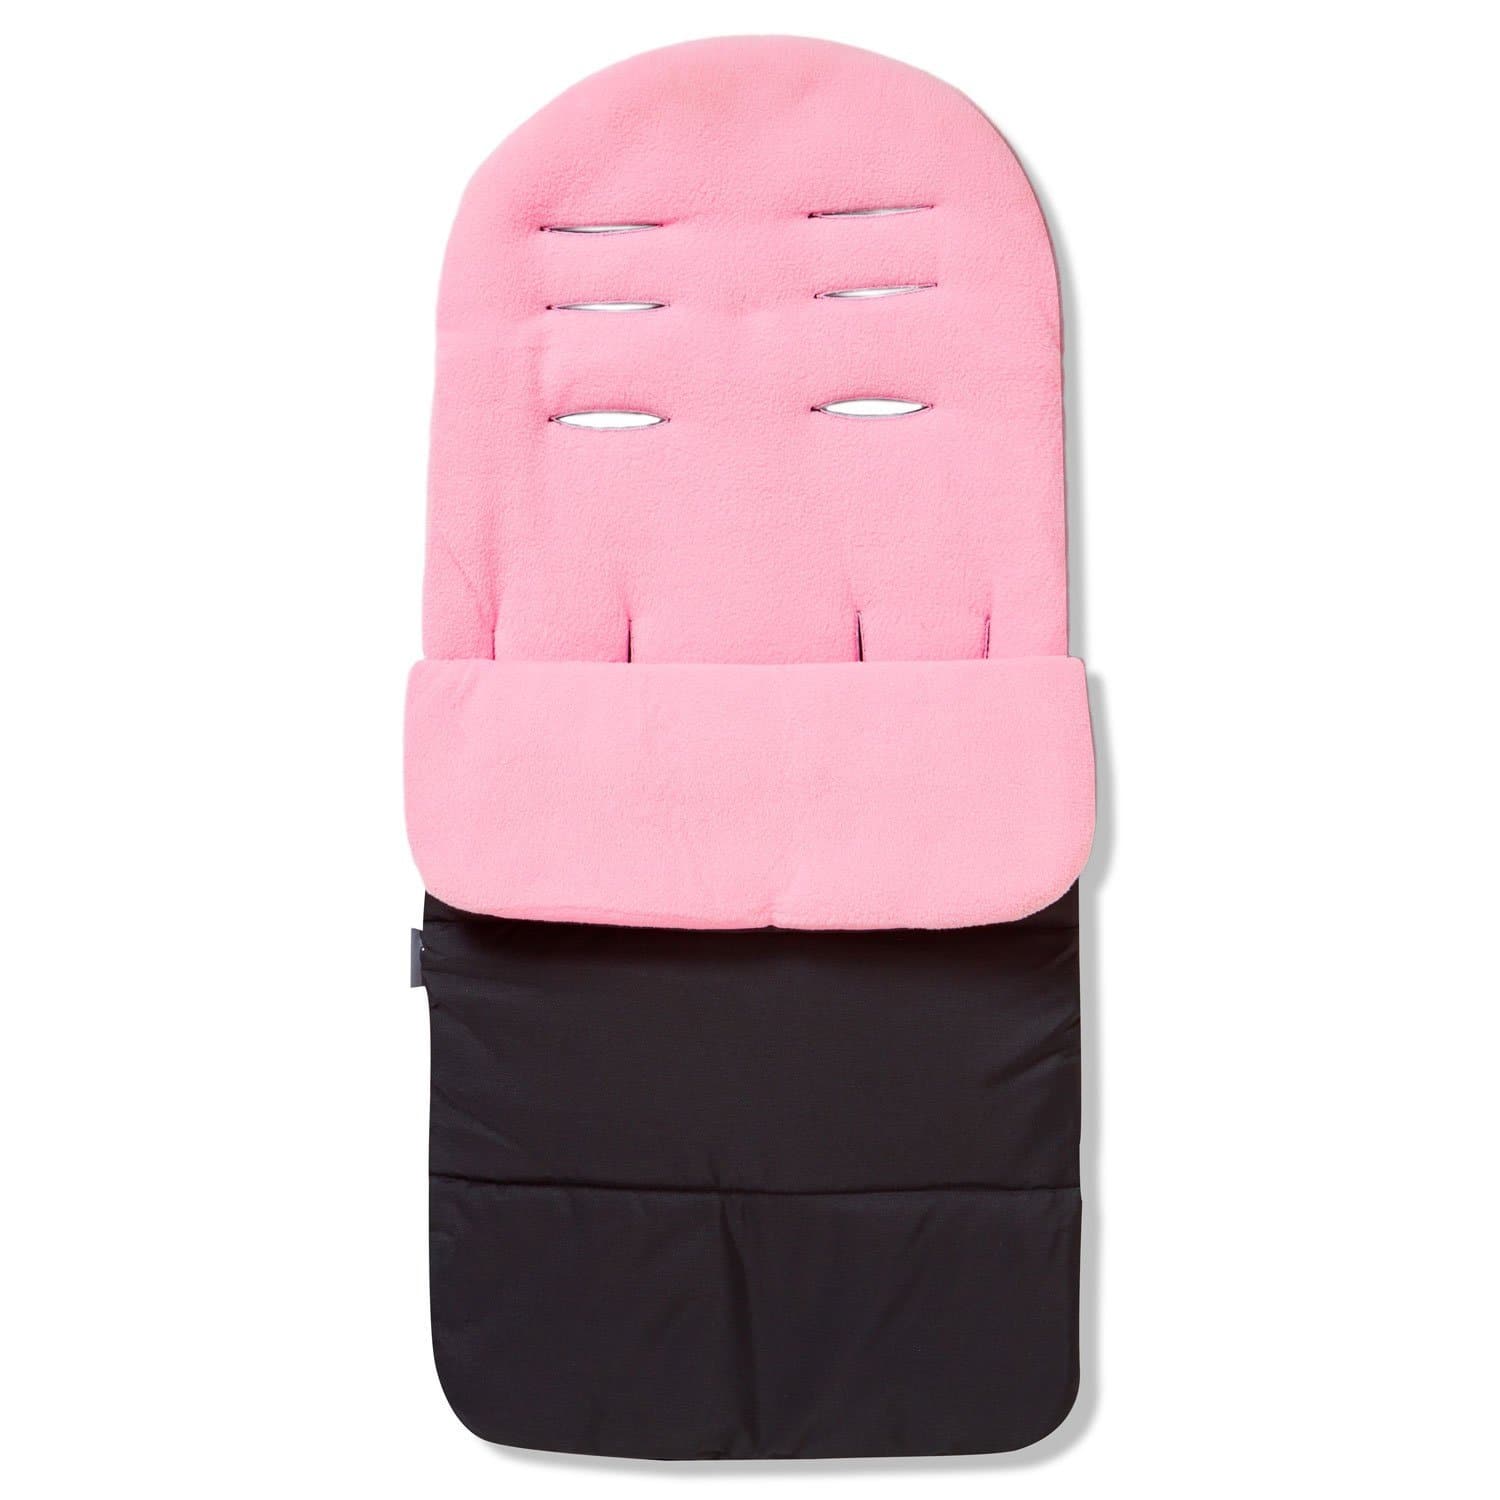 Premium Footmuff / Cosy Toes Compatible with Babystyle - Candy Pink / Fits All Models | For Your Little One